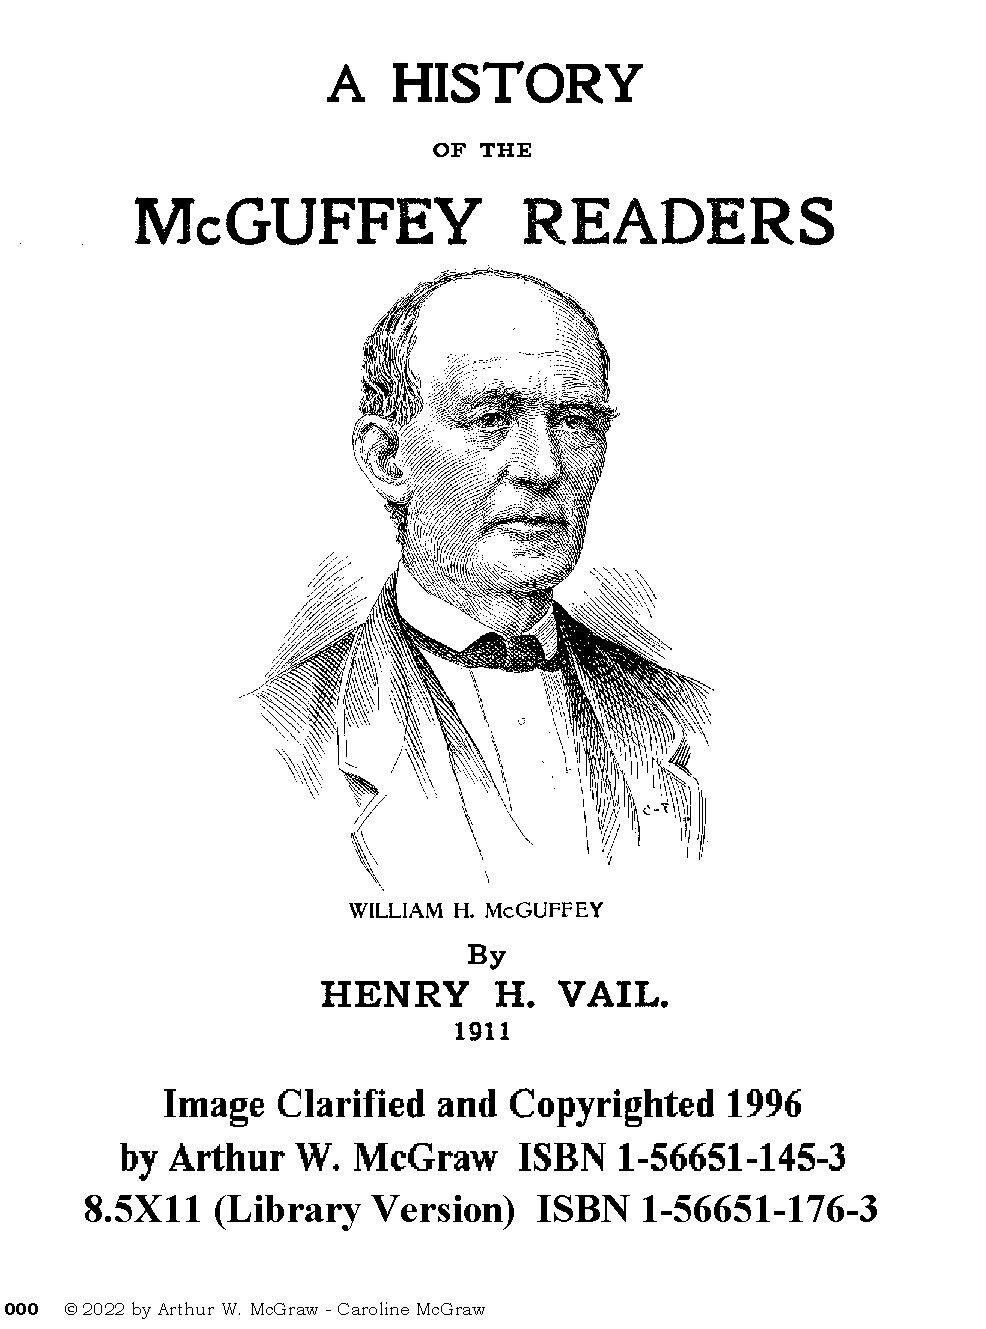 A History of the McGuffey Readers - 1911 - Henry H. Vail - pdf